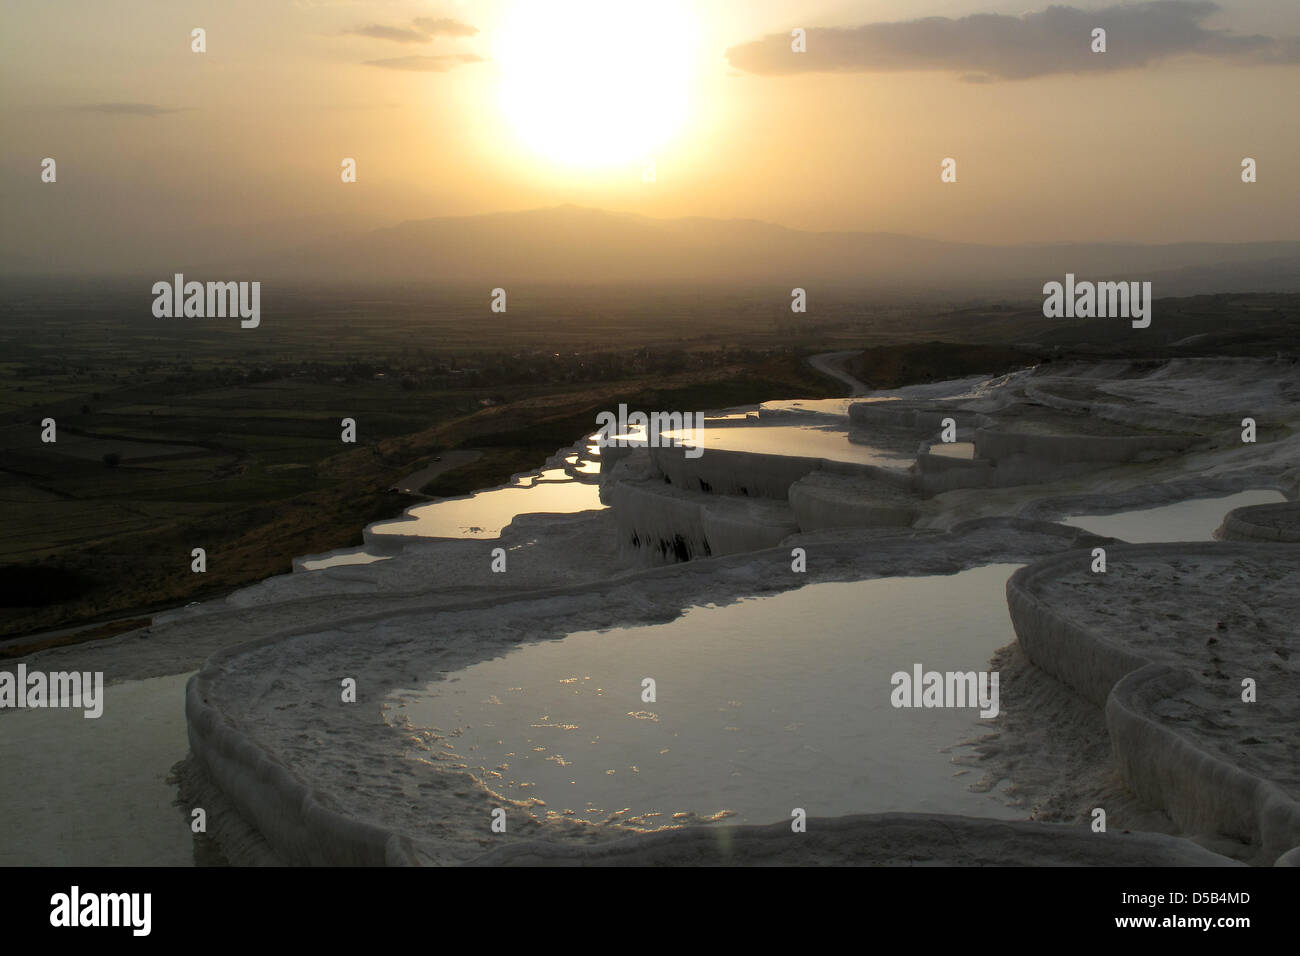 Water from thermal springs, in which the temperature lies between 30 and 40 degrees Celsius, has formed travertine terraces in Pamukkale, Turkey, 23 May 2009. The terraces are a UNESCO World Heritage Site. Photo: Tom Schulze Stock Photo